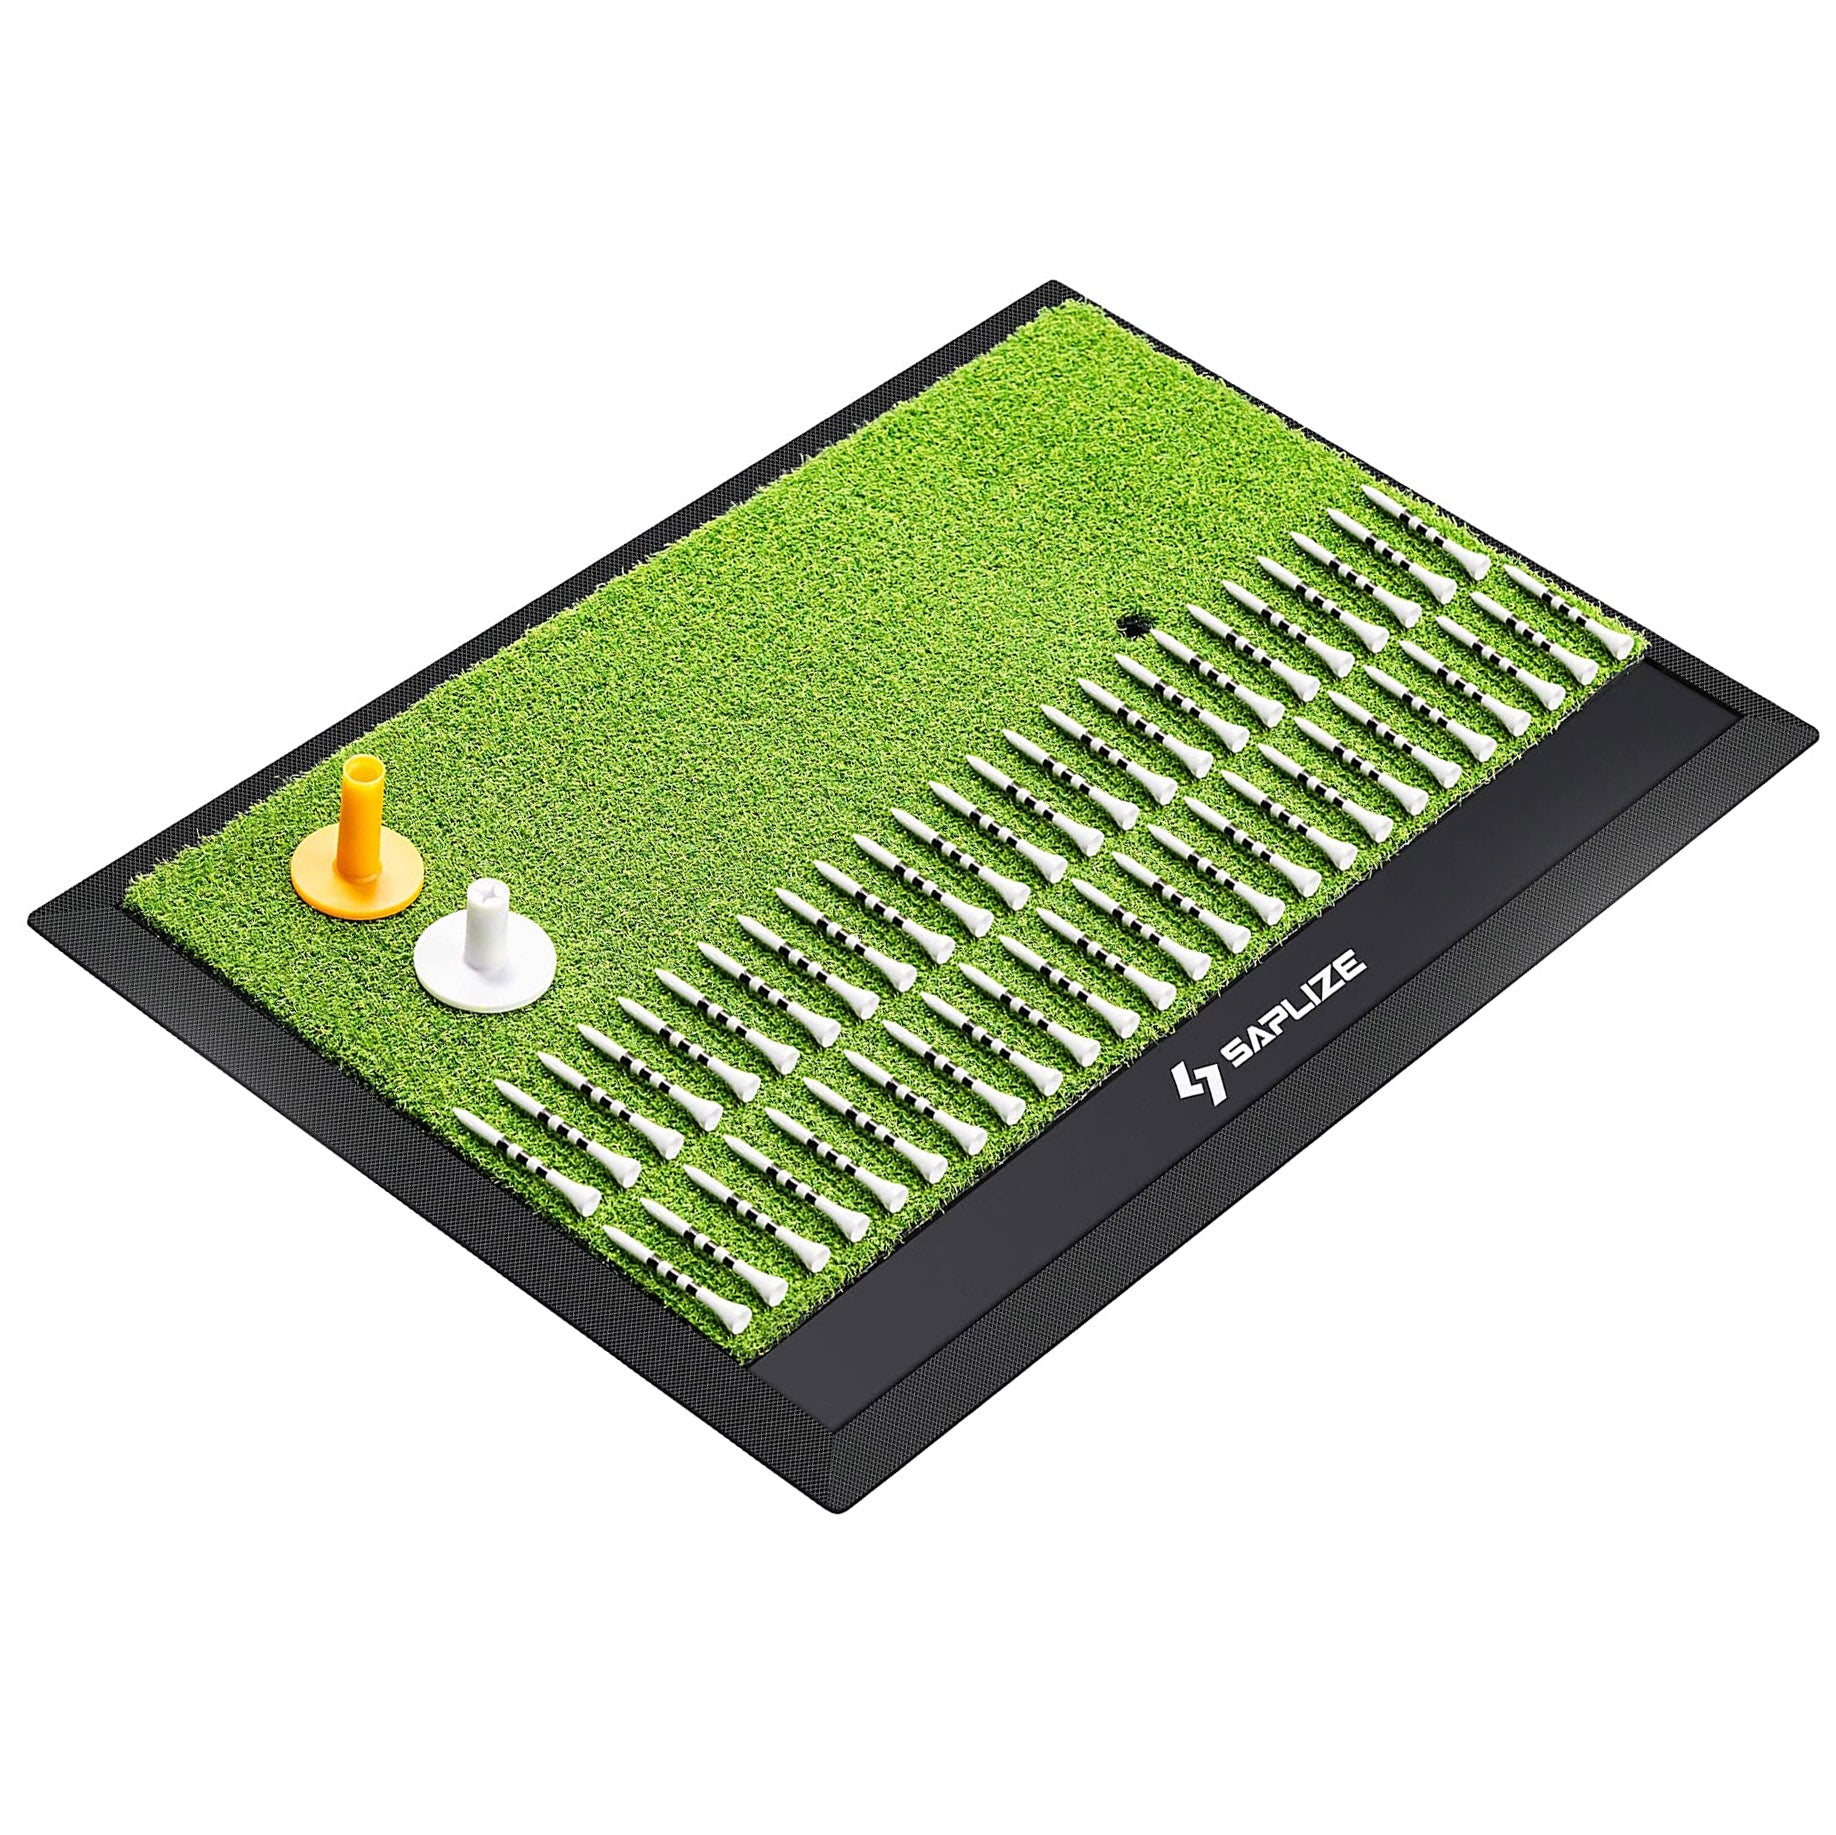 Golf Mat, Two Size Options (13" x 23", 12" x 24"Available)